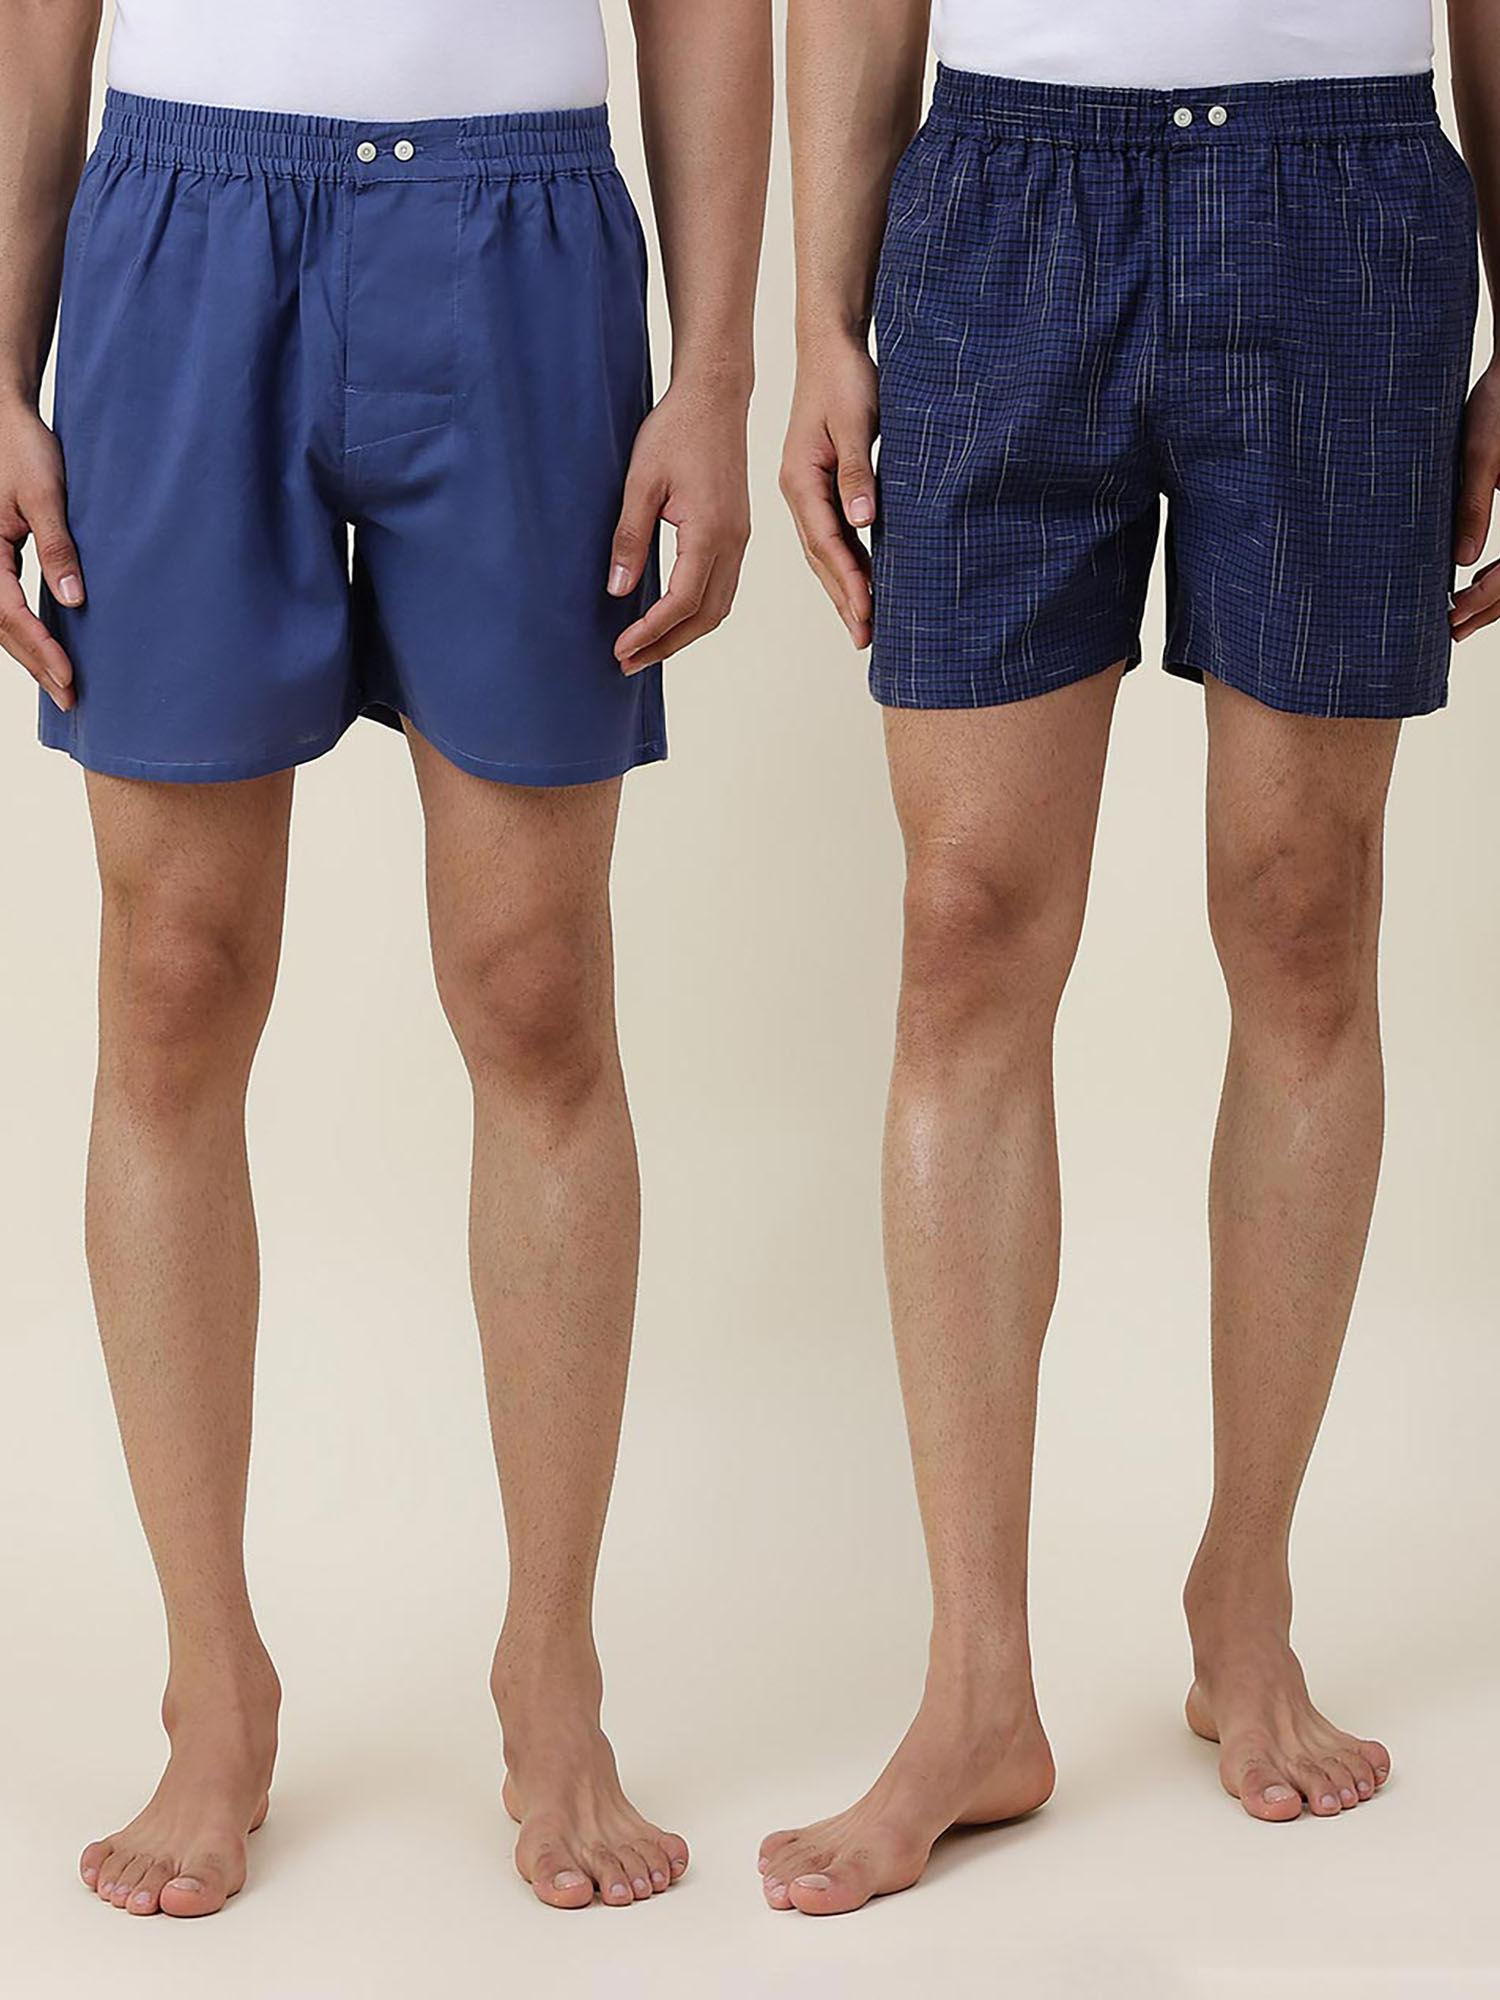 blue-cotton-full-elasticated-boxer-shorts-(pack-of-2)